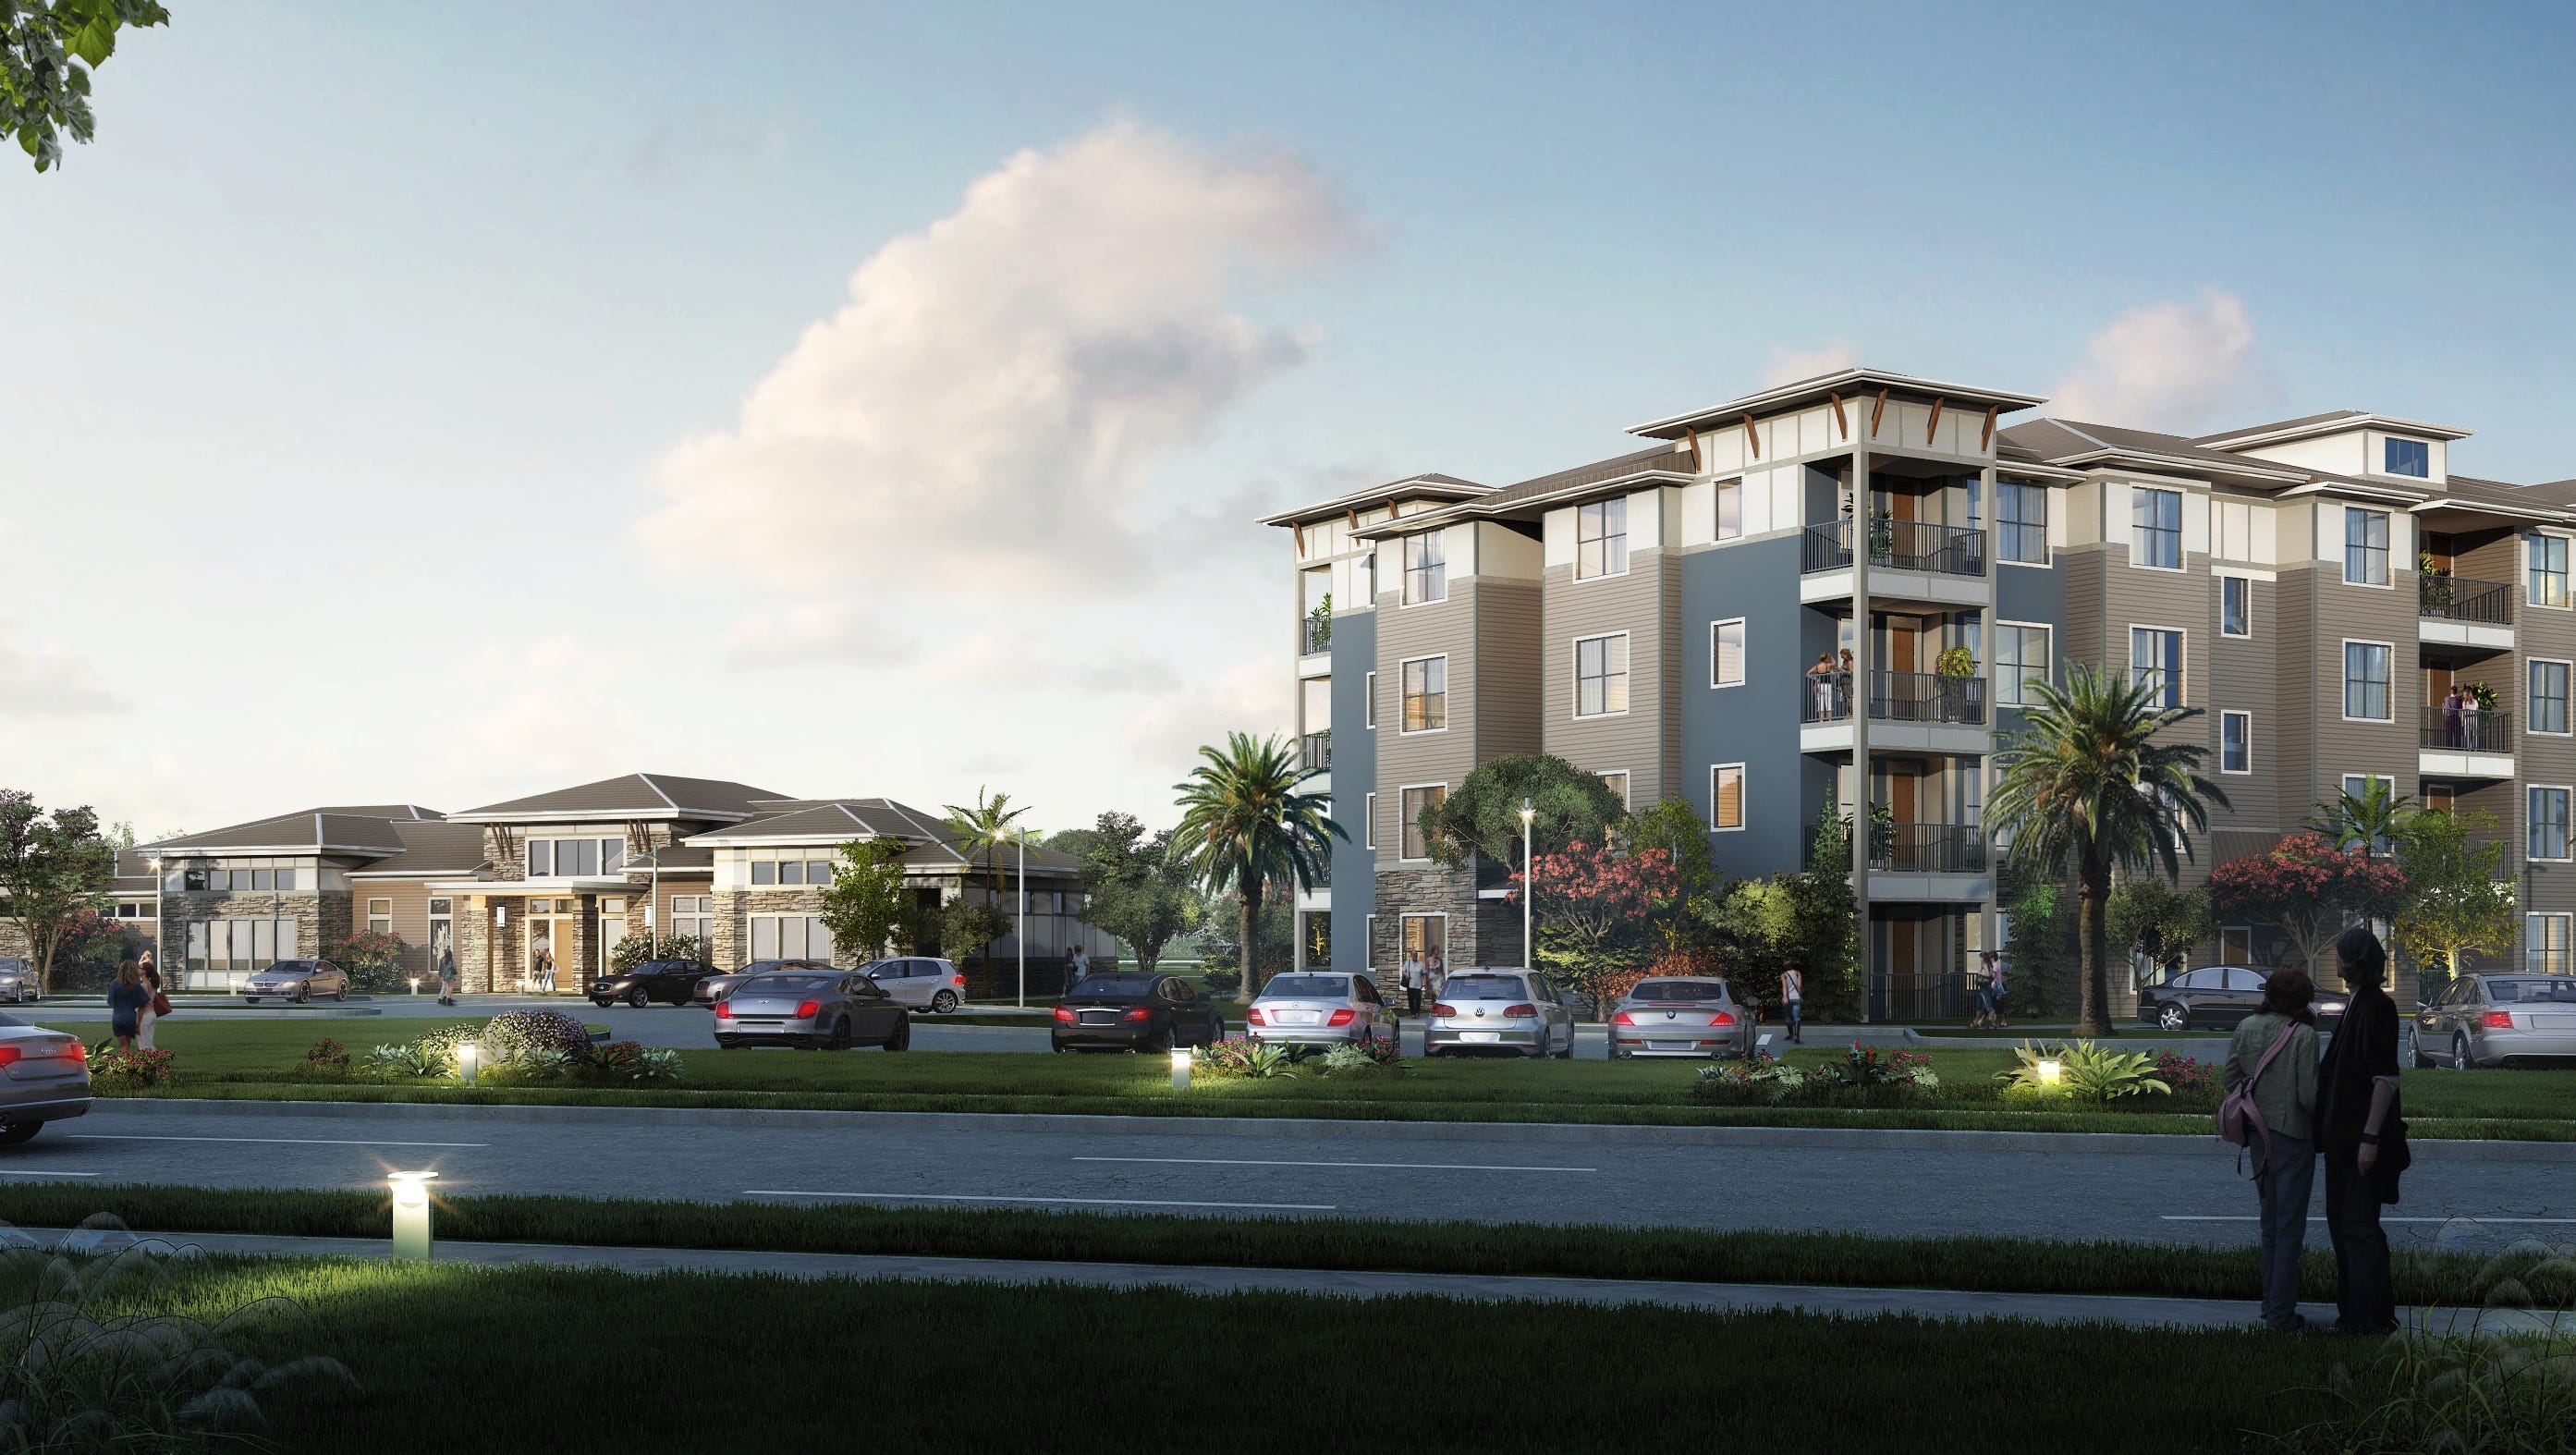 276 'luxury' apartments to be built near Daytona's Tanger Outlets